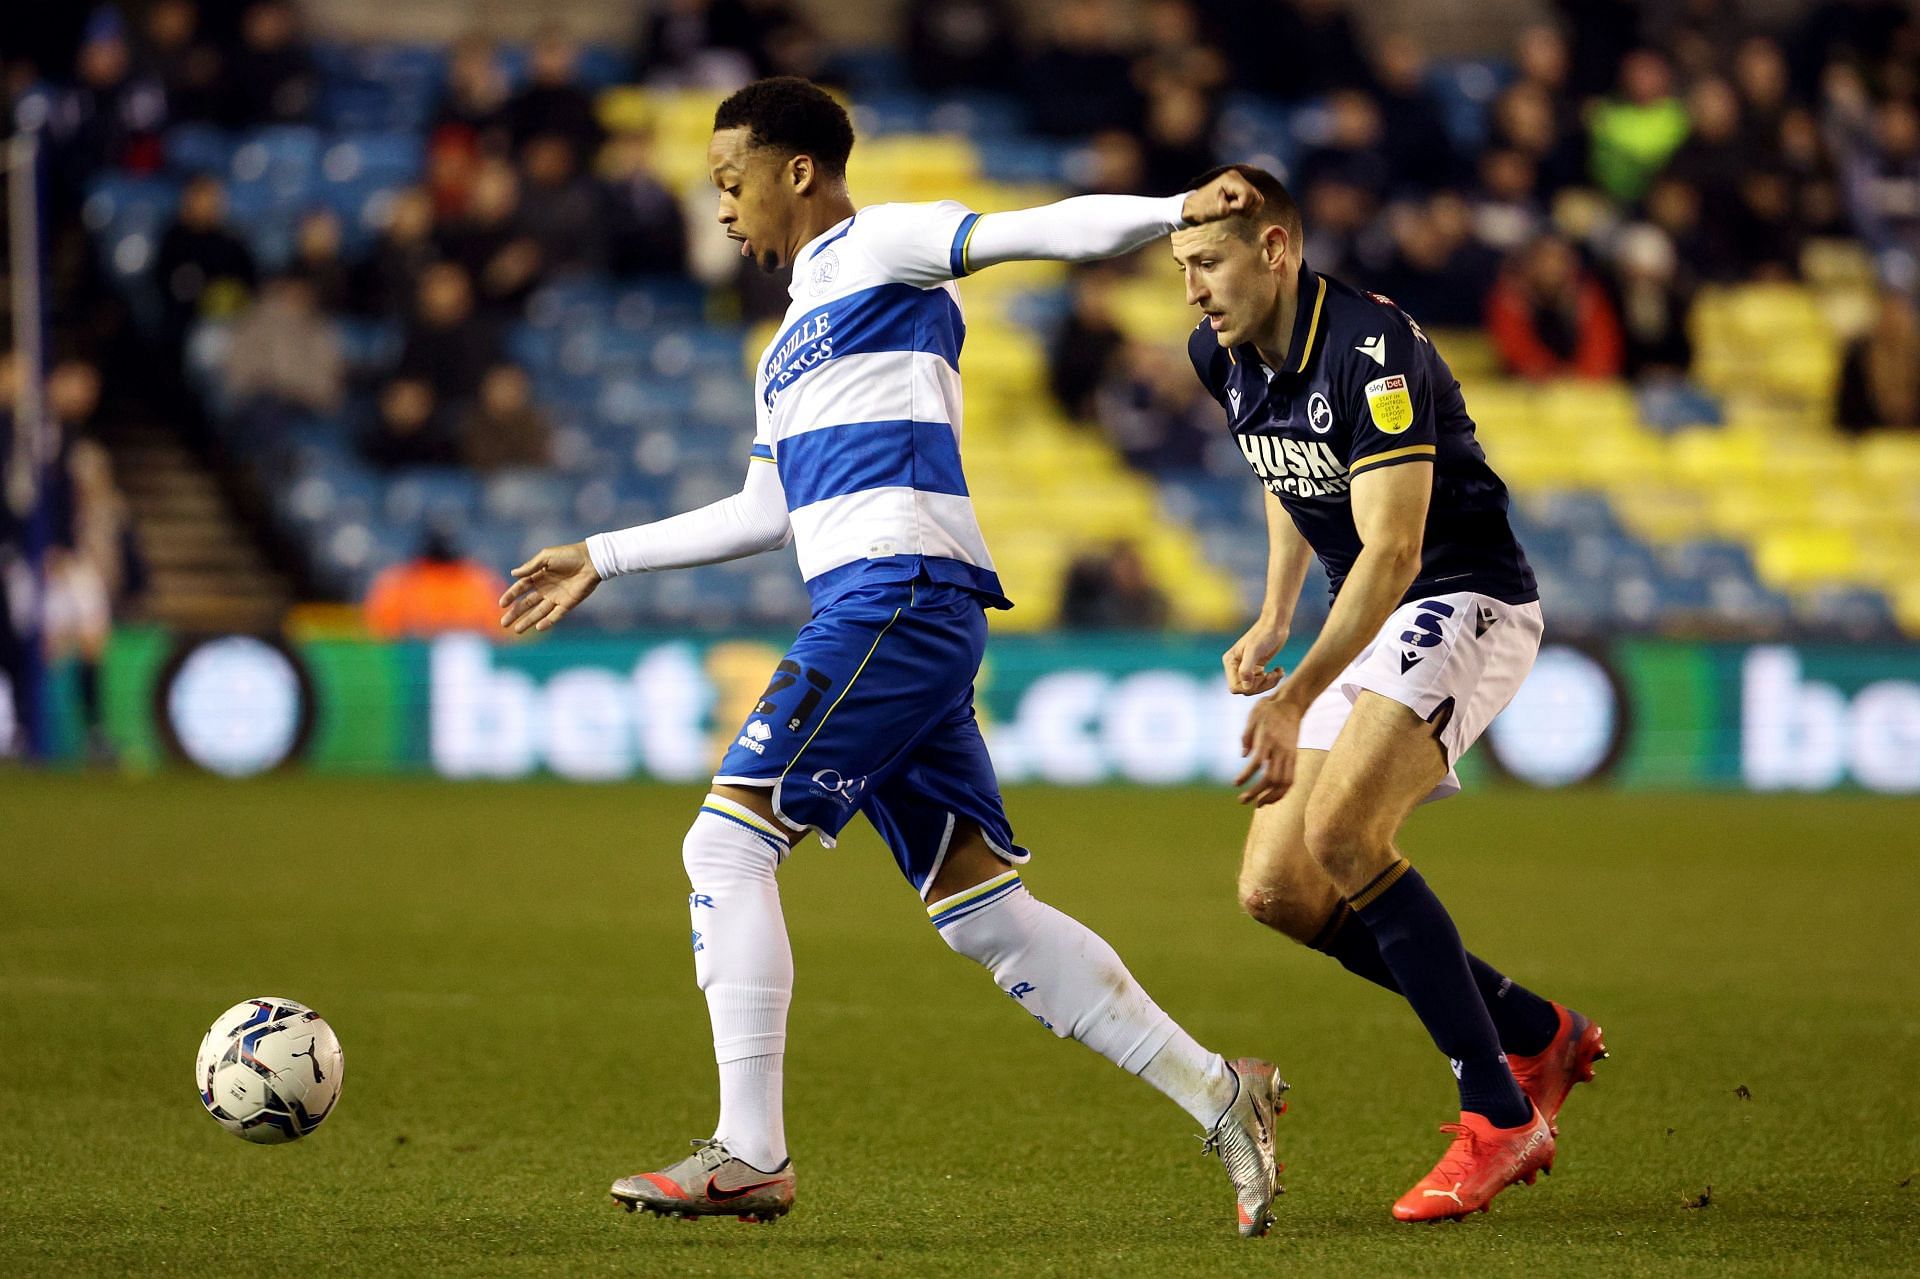 Willock will be a huge miss for QPR